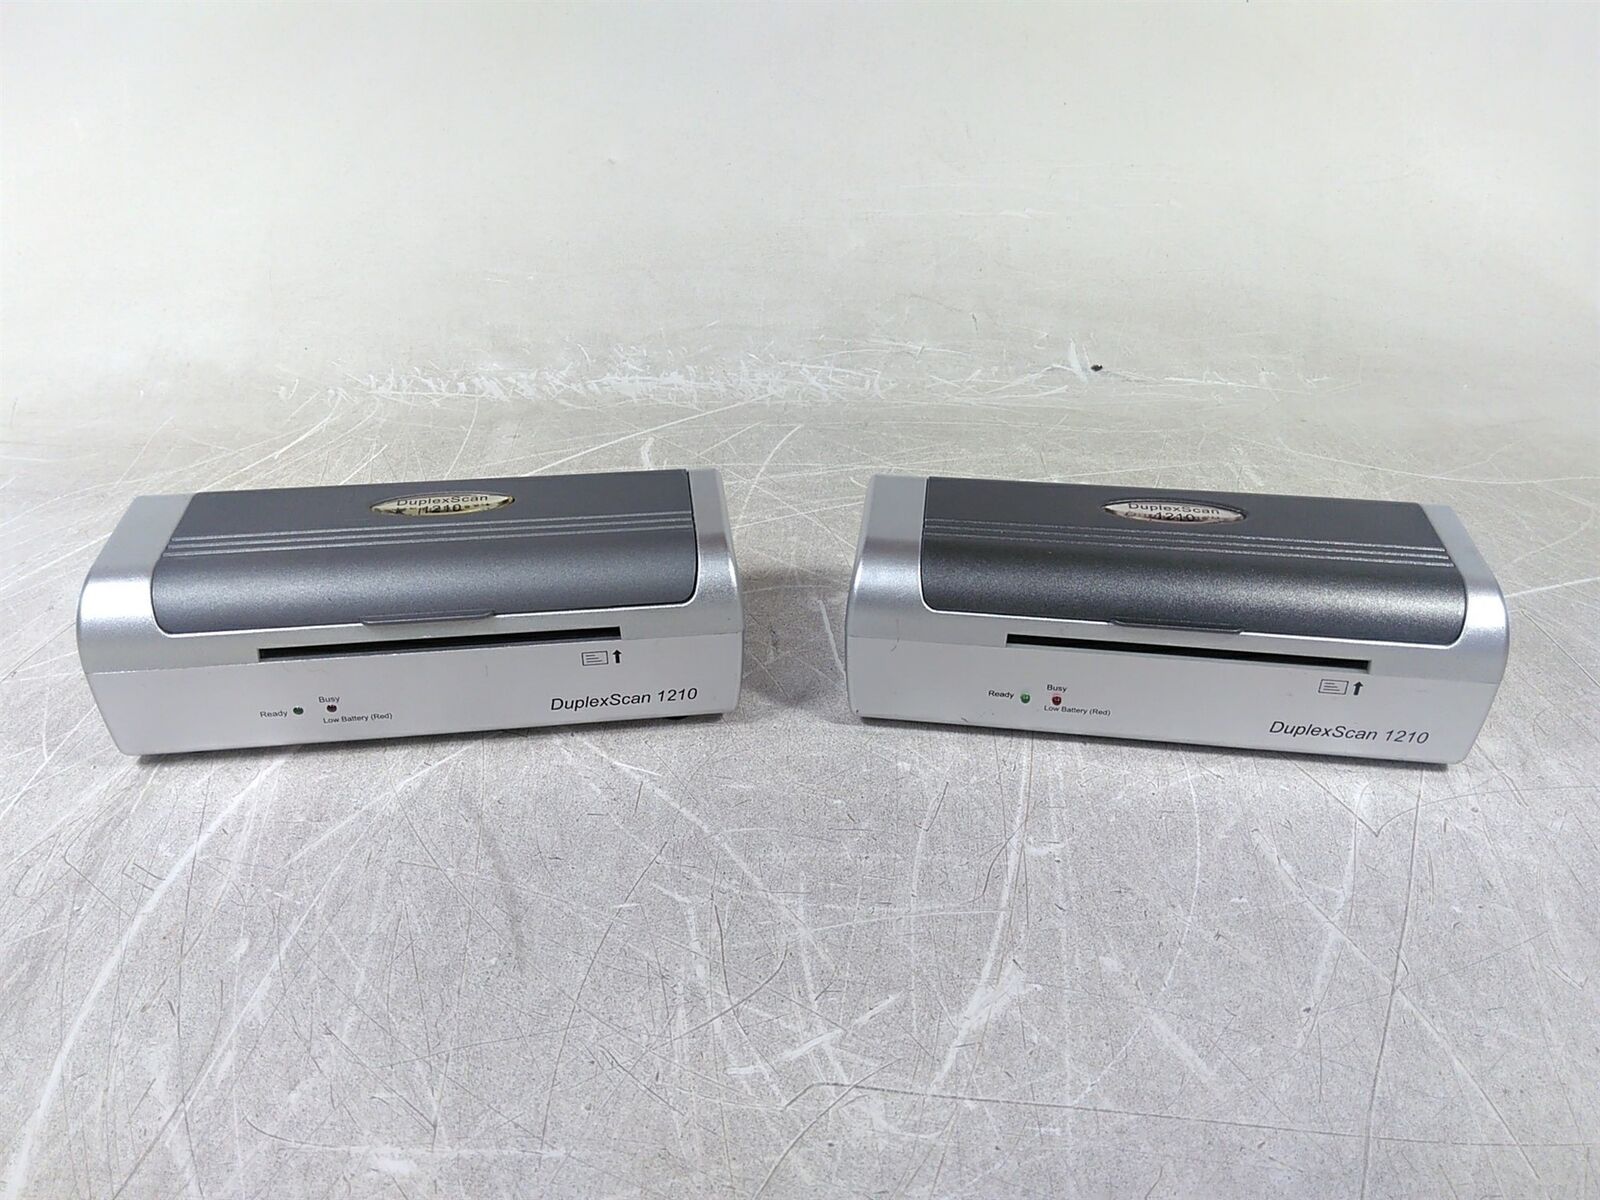 Defective Lot of 2x CardReader DuplexScan 1210 Card Scanner AS-IS For Parts